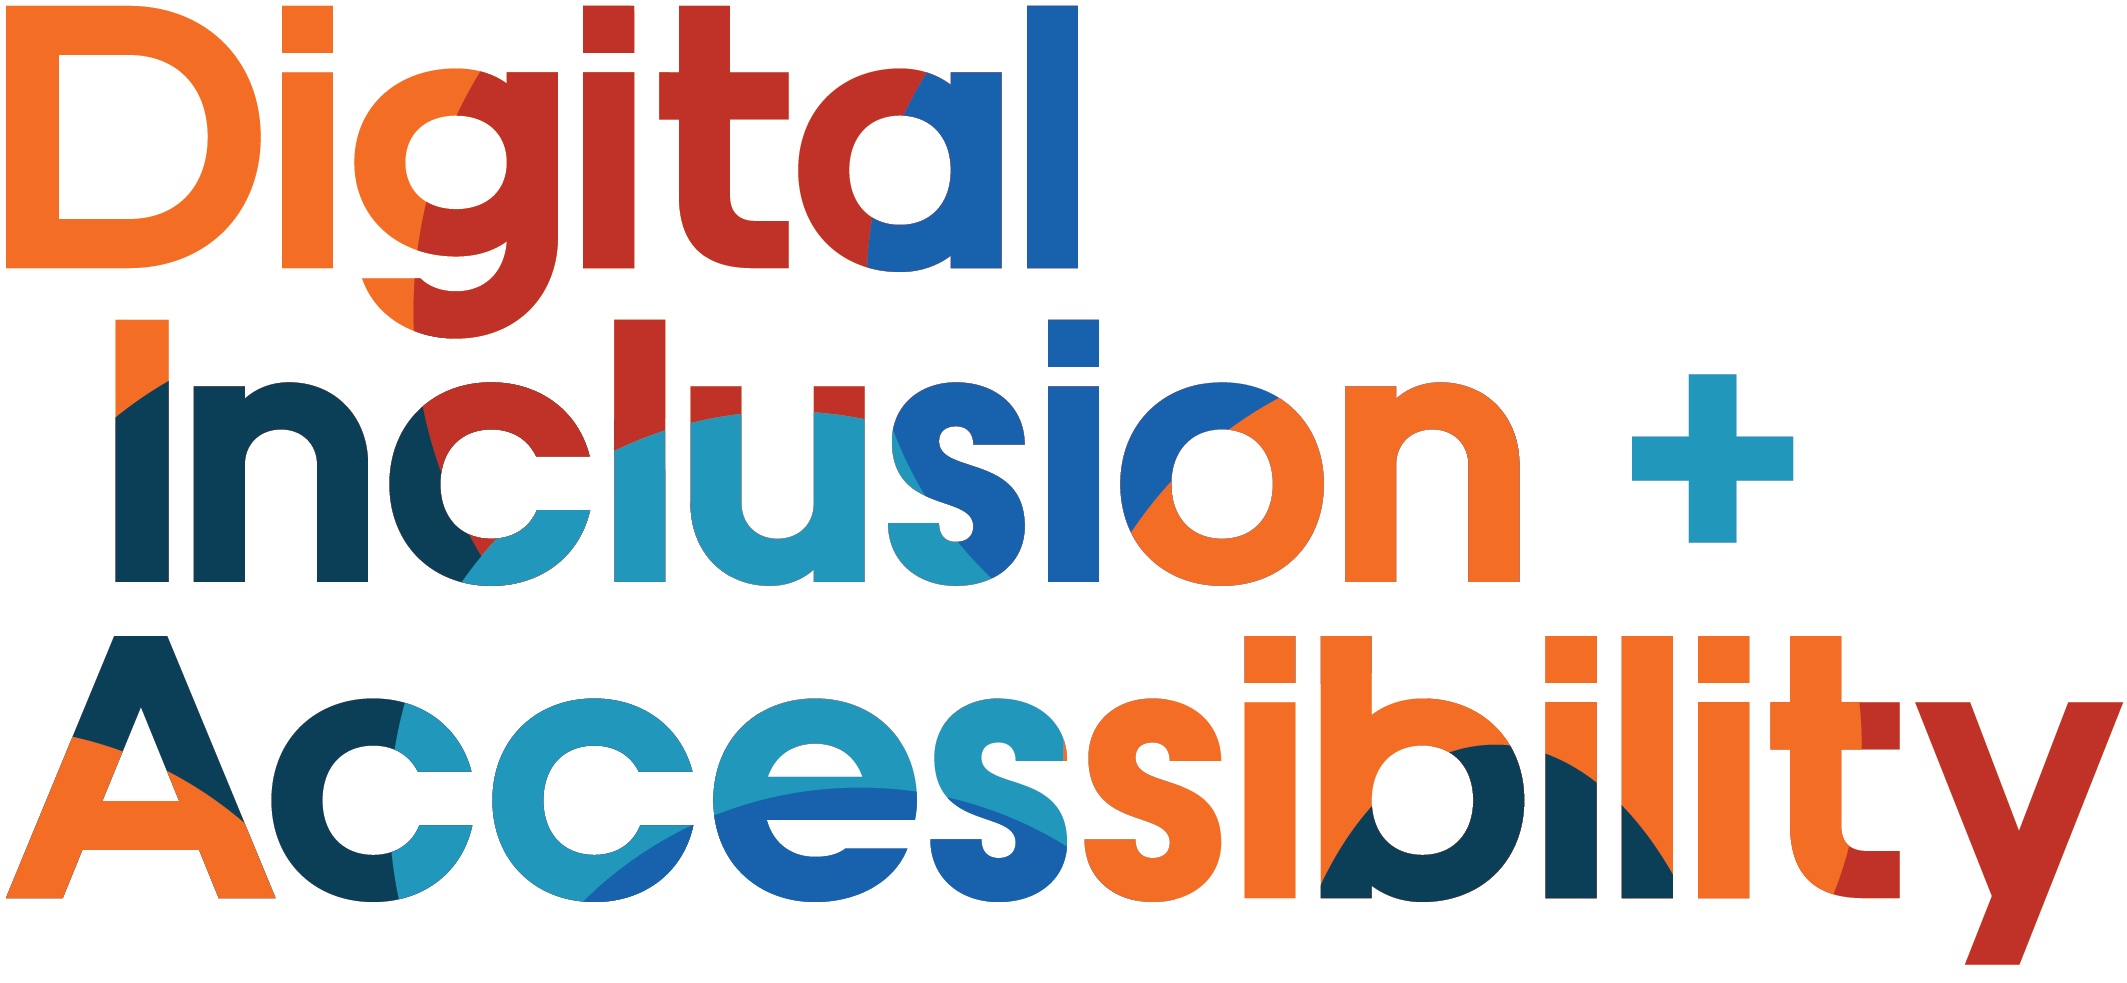 2018 Digital Inclusion + Accessibility Conference logo. This logo was designed using plain language, high color contrast for people with low vision and color blindness, and sentence-case text for people with dyslexia. The overlapping colors within the text represent unity and transparency.